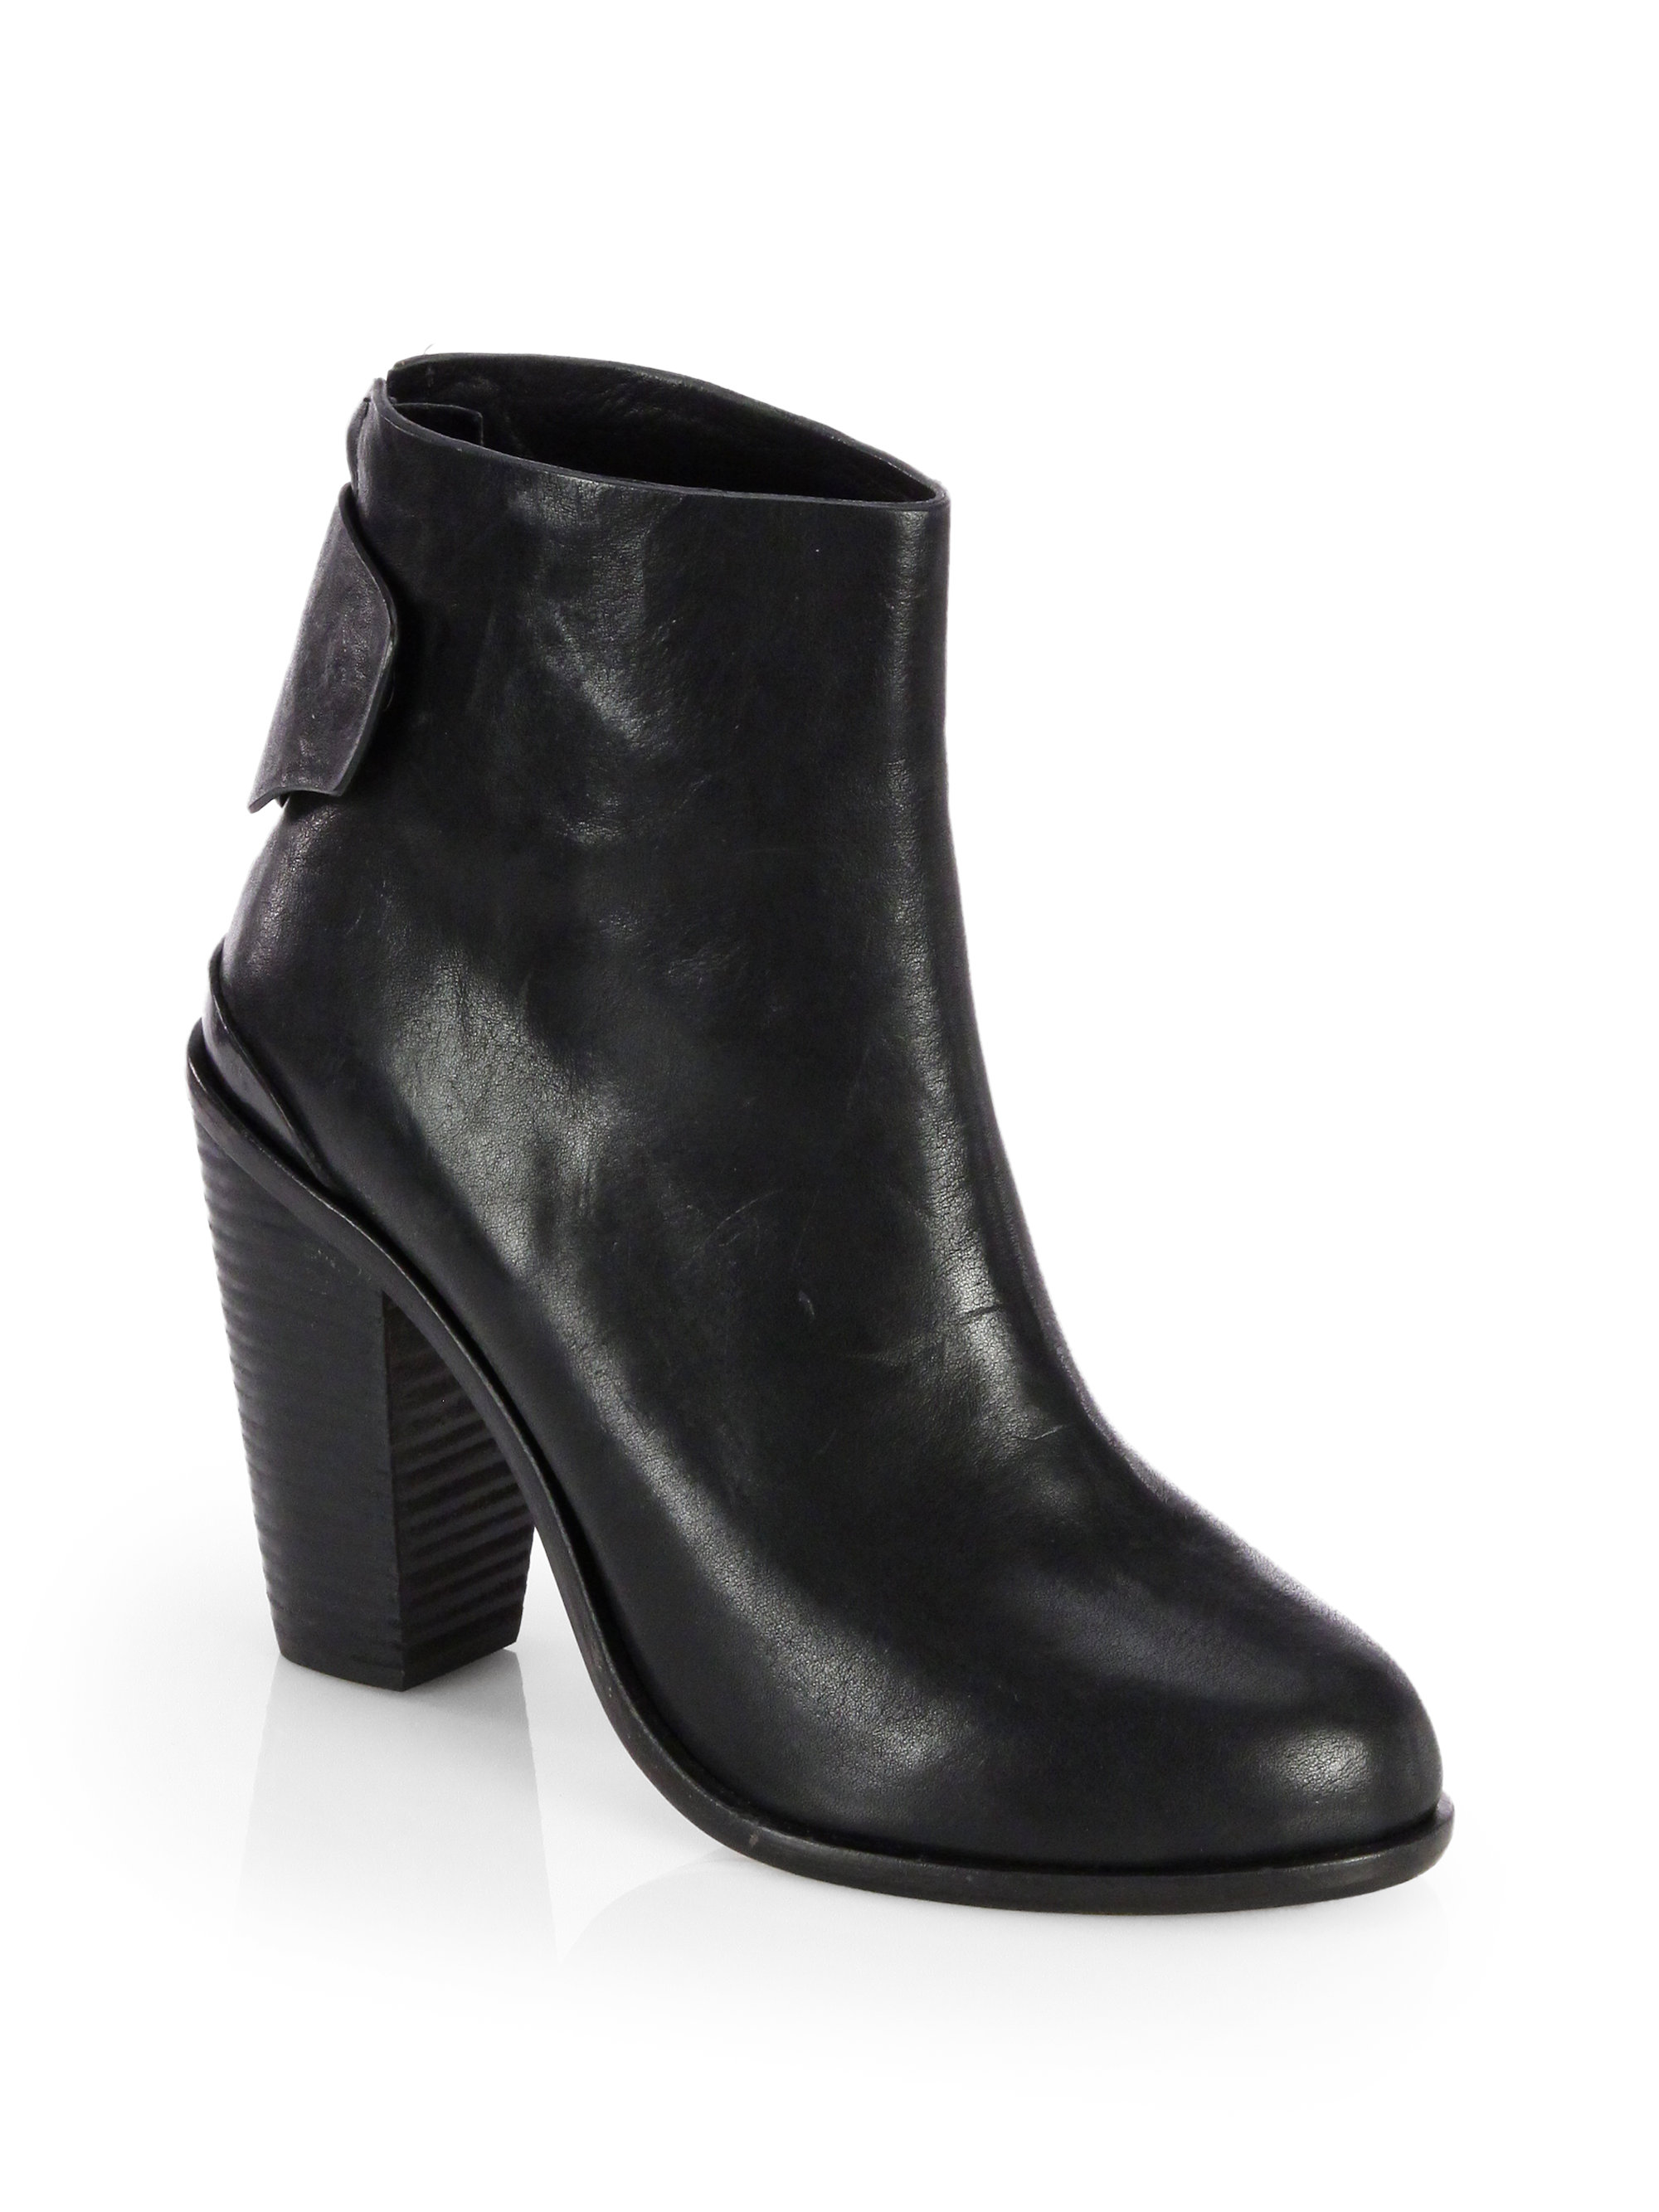 rag and bone black ankle boots